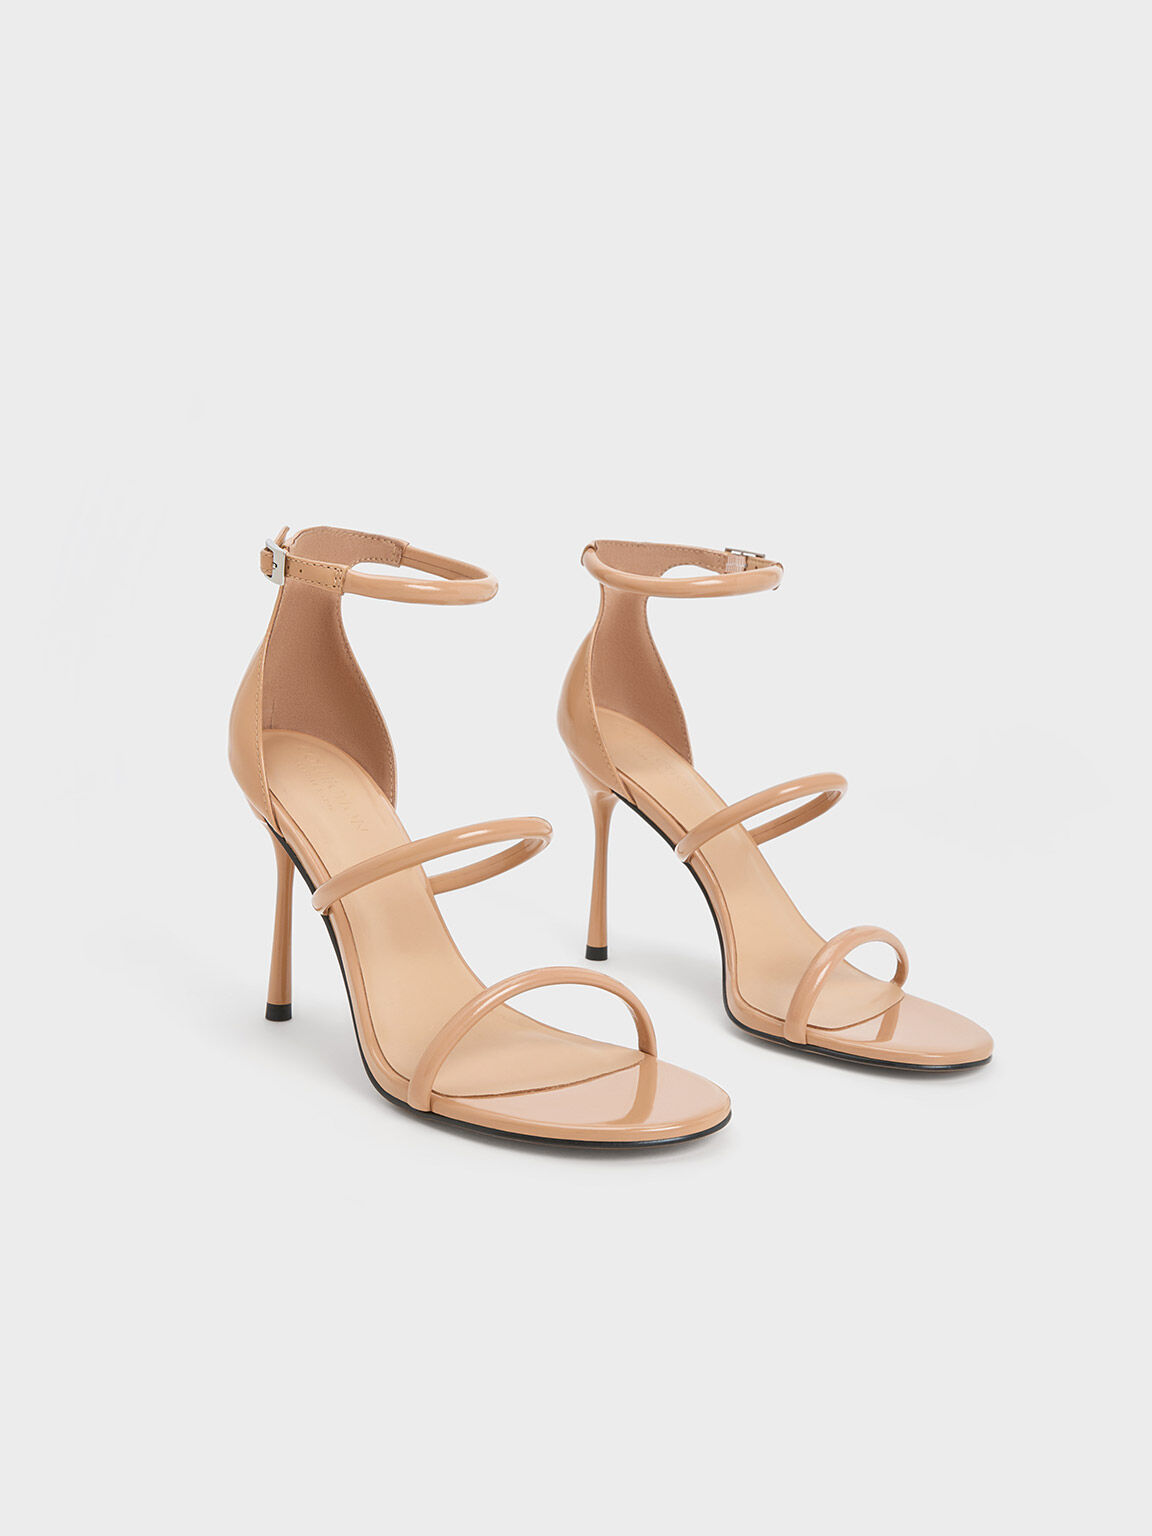 Nude Patent Leather Triple Strap Heeled Sandals - CHARLES & KEITH US